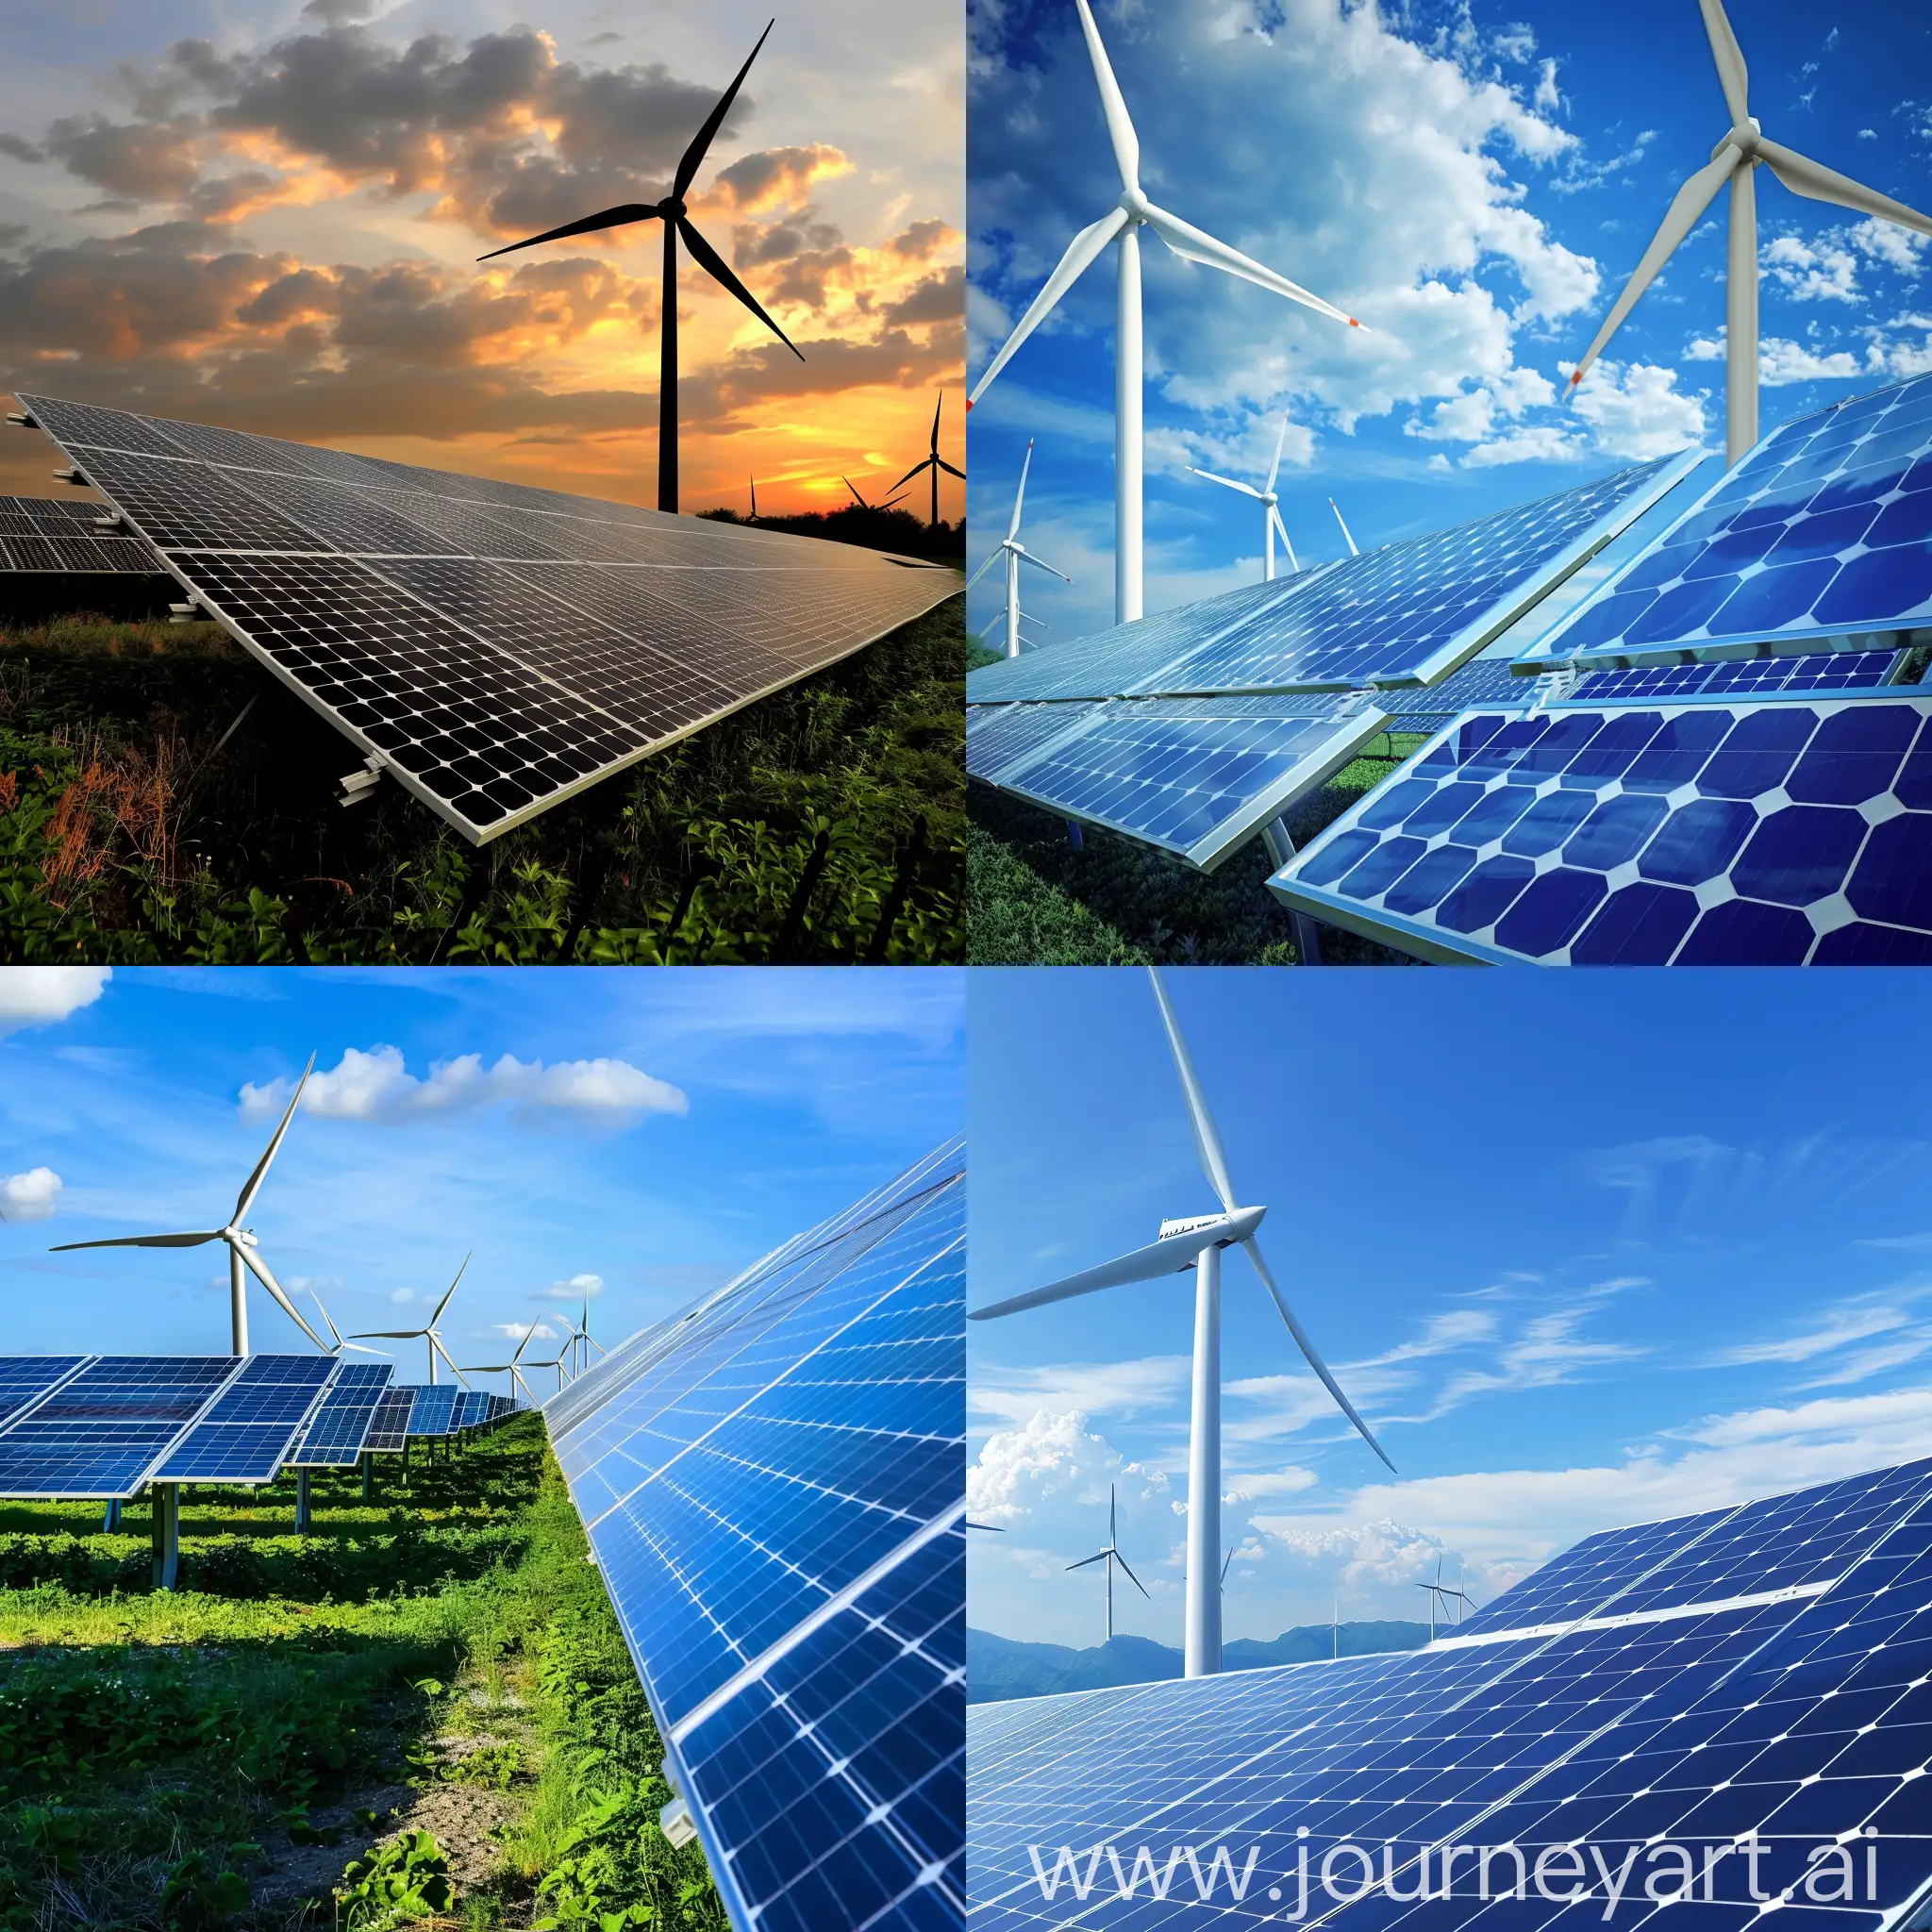 tremendous growth of renewable energy in the future, solar and wind energy